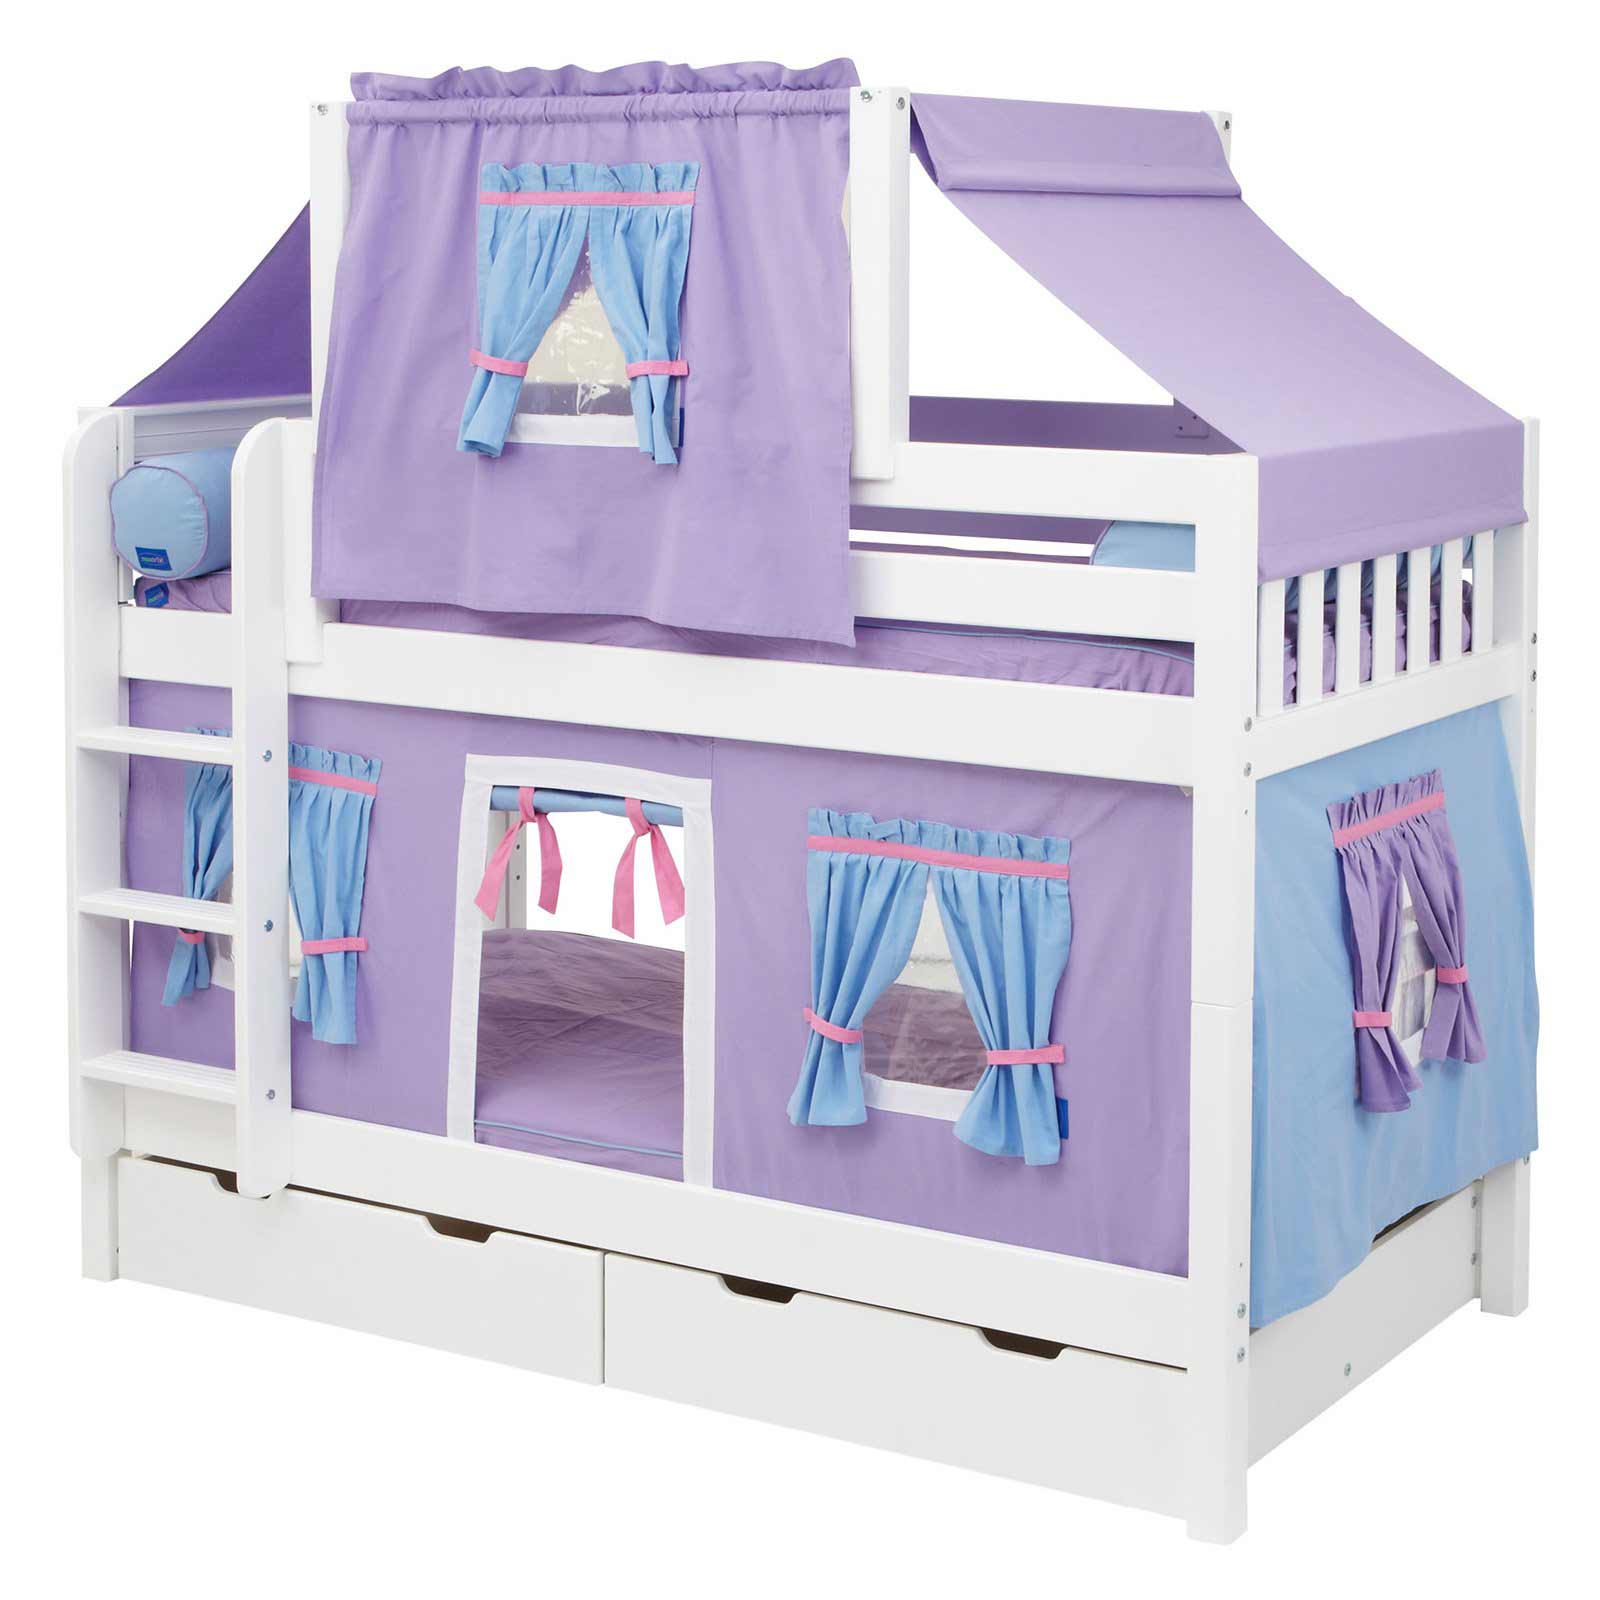 just like the conventional bunk beds the bed tents for bunk beds also ...